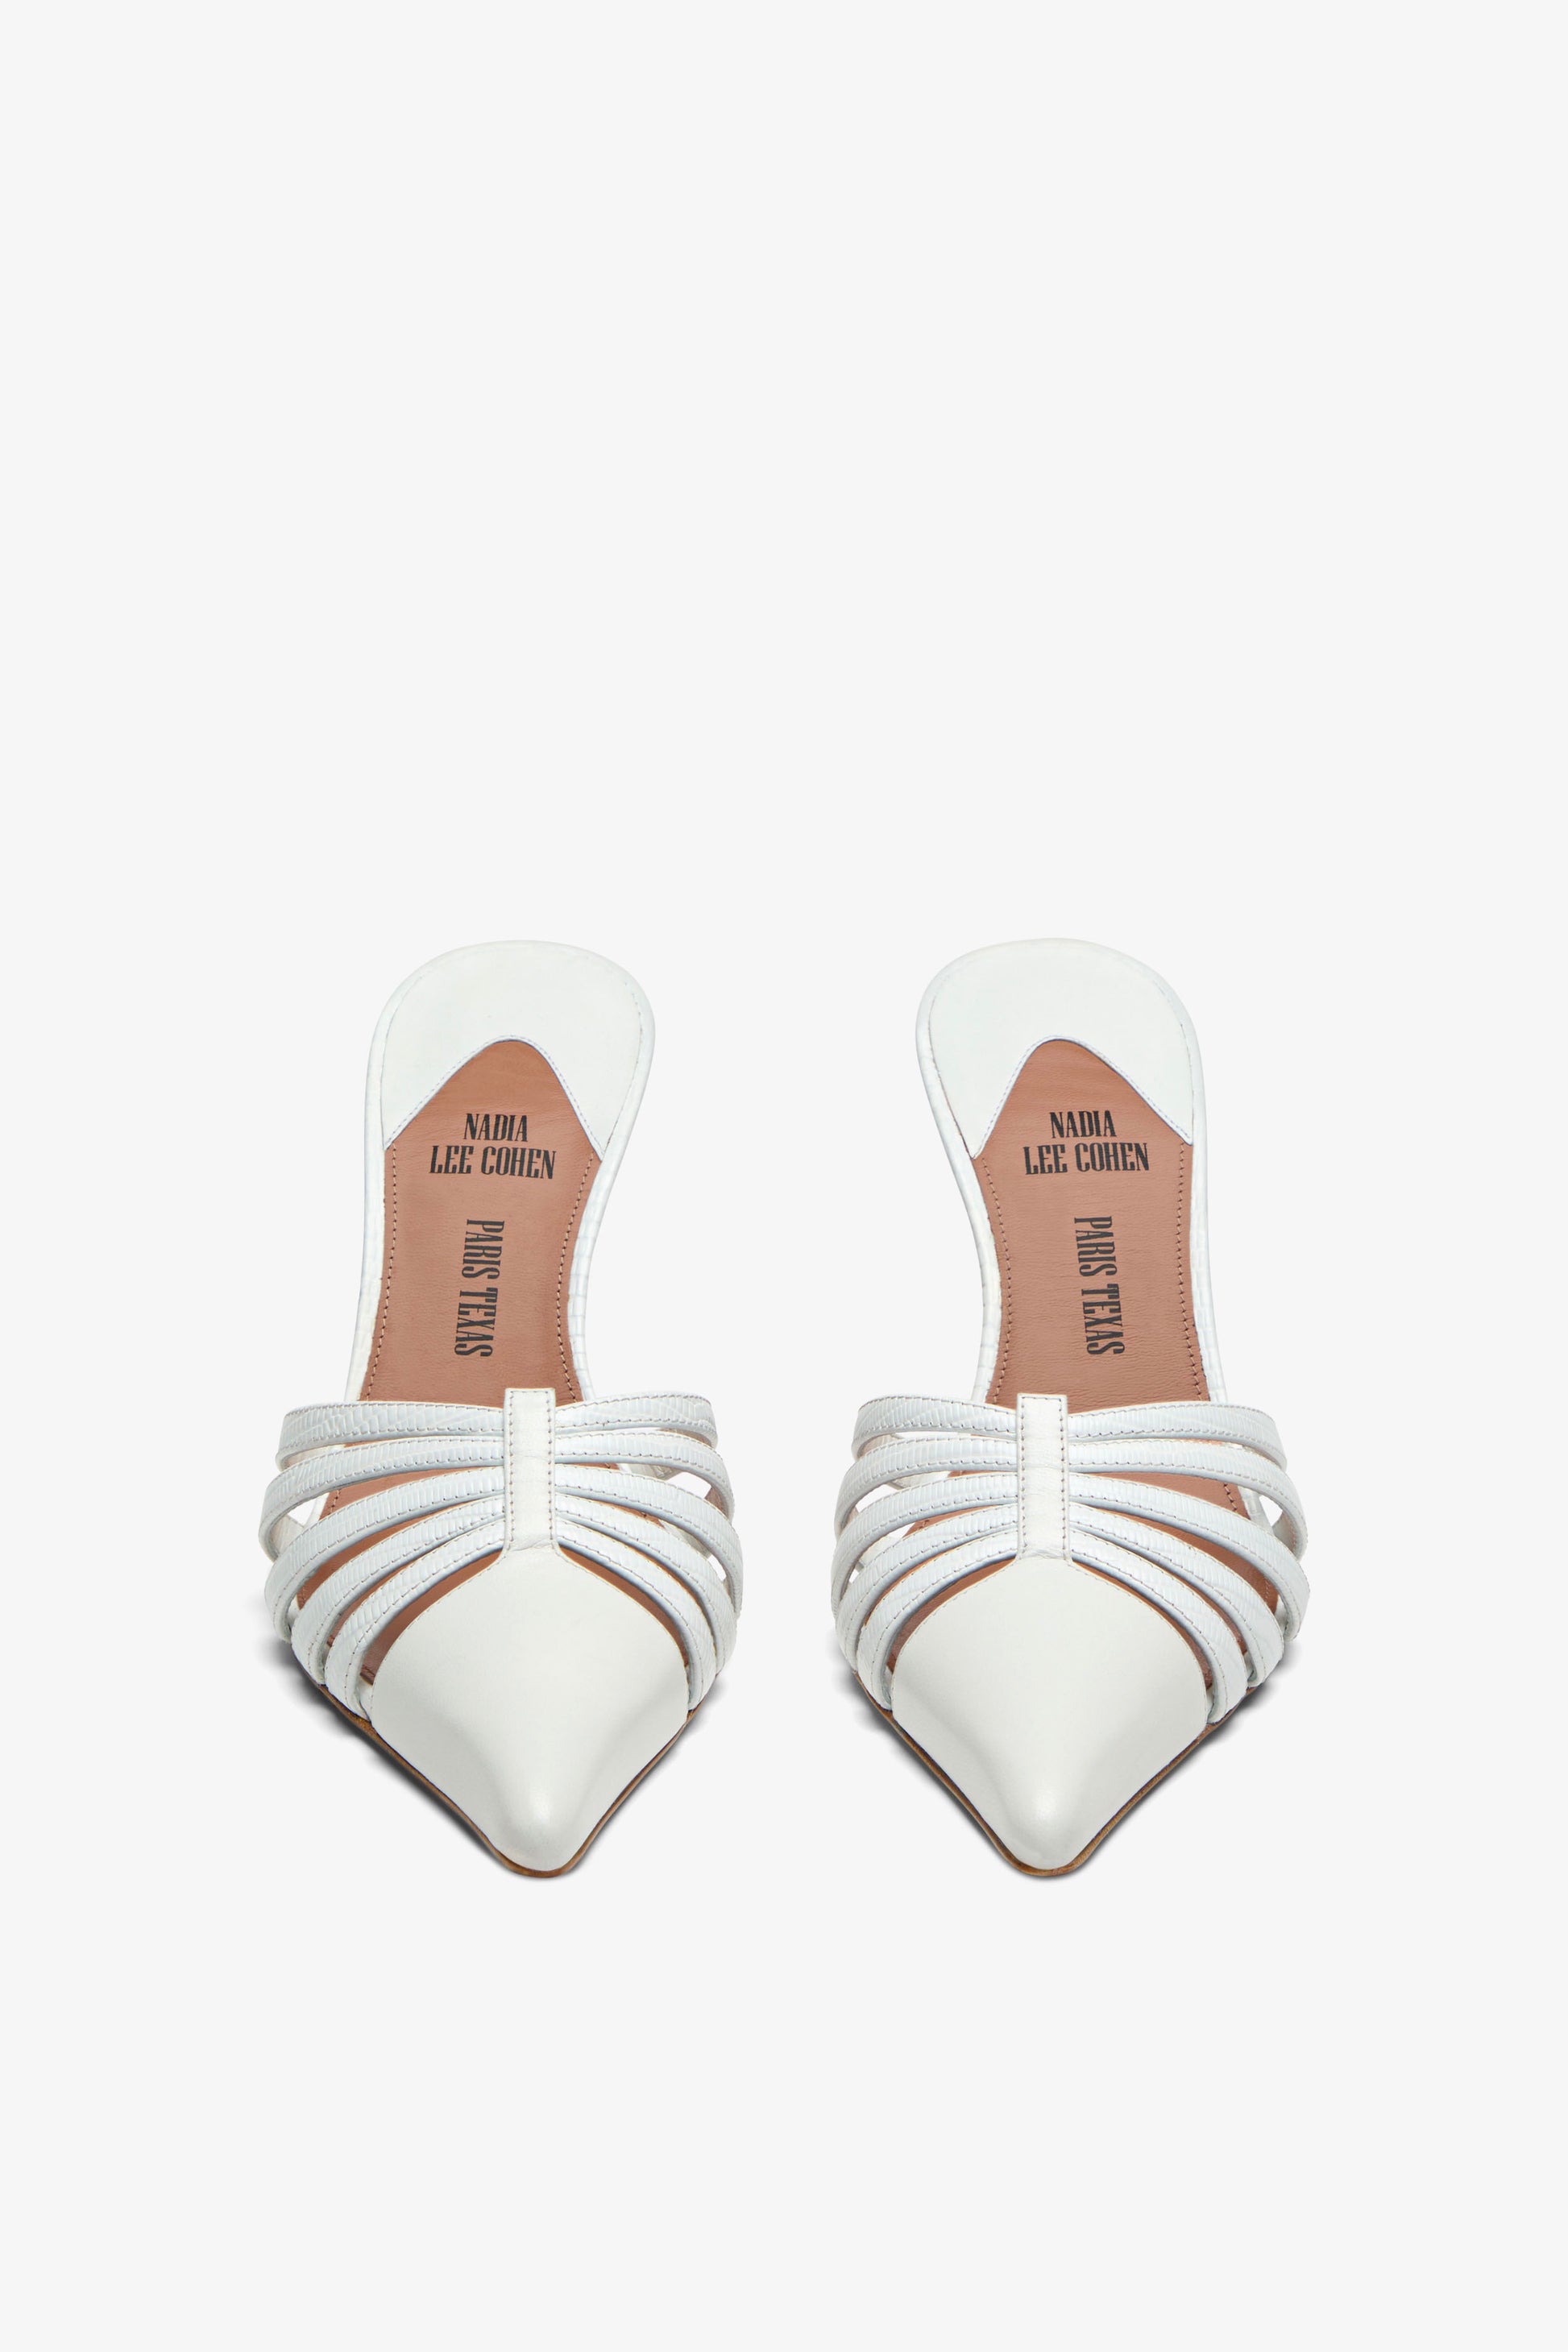 White leather cut-out mule